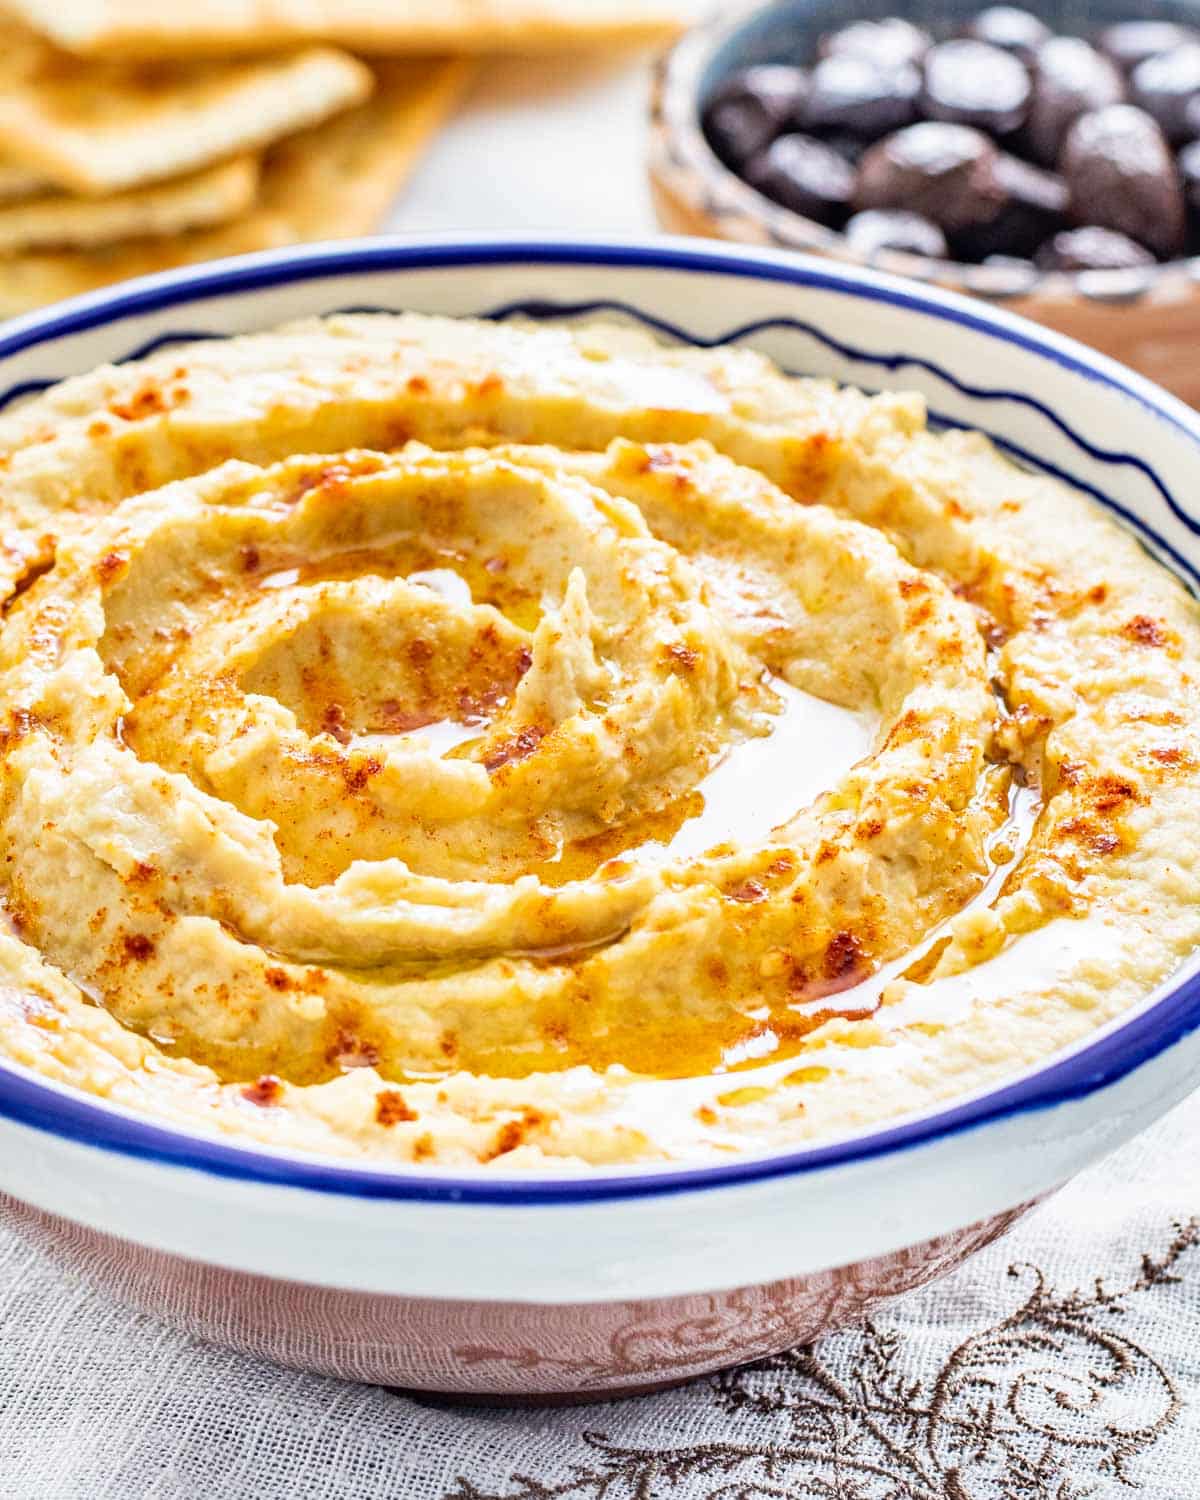 sideview shot of a bowl filled with freshly made hummus drizzled with olive oil and sprinkled with a bit of paprika